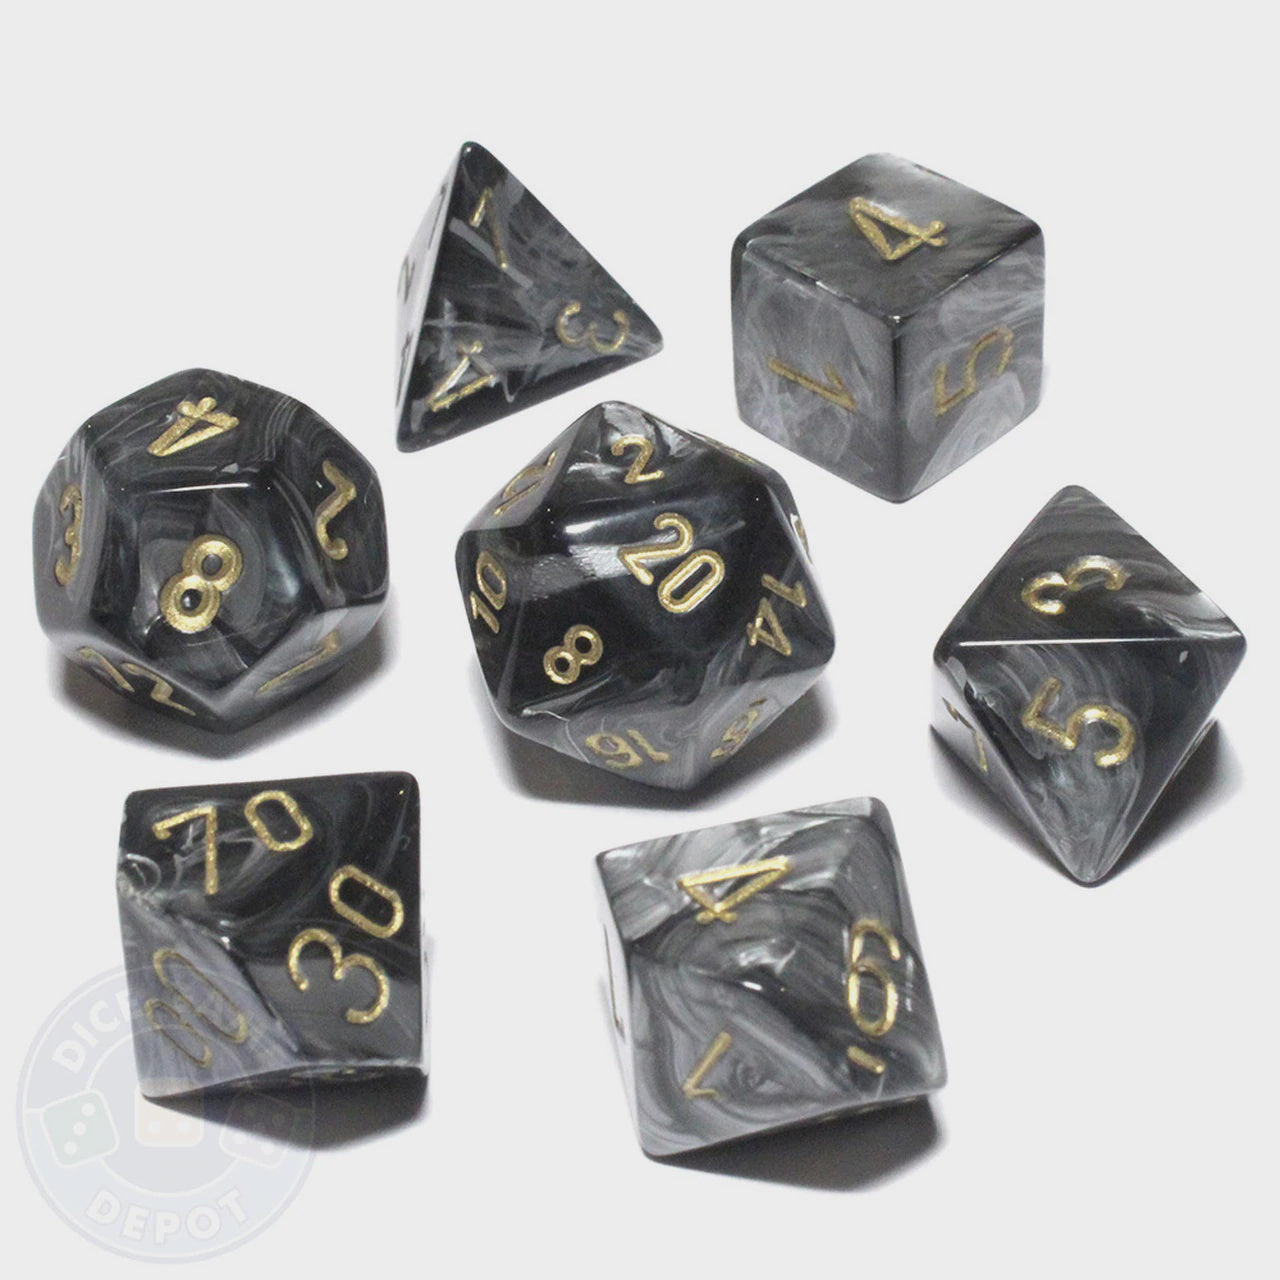 CHESSEX 7 DIE POLYHEDRAL DICE SET: LUSTROUS BLACK WITH GOLD